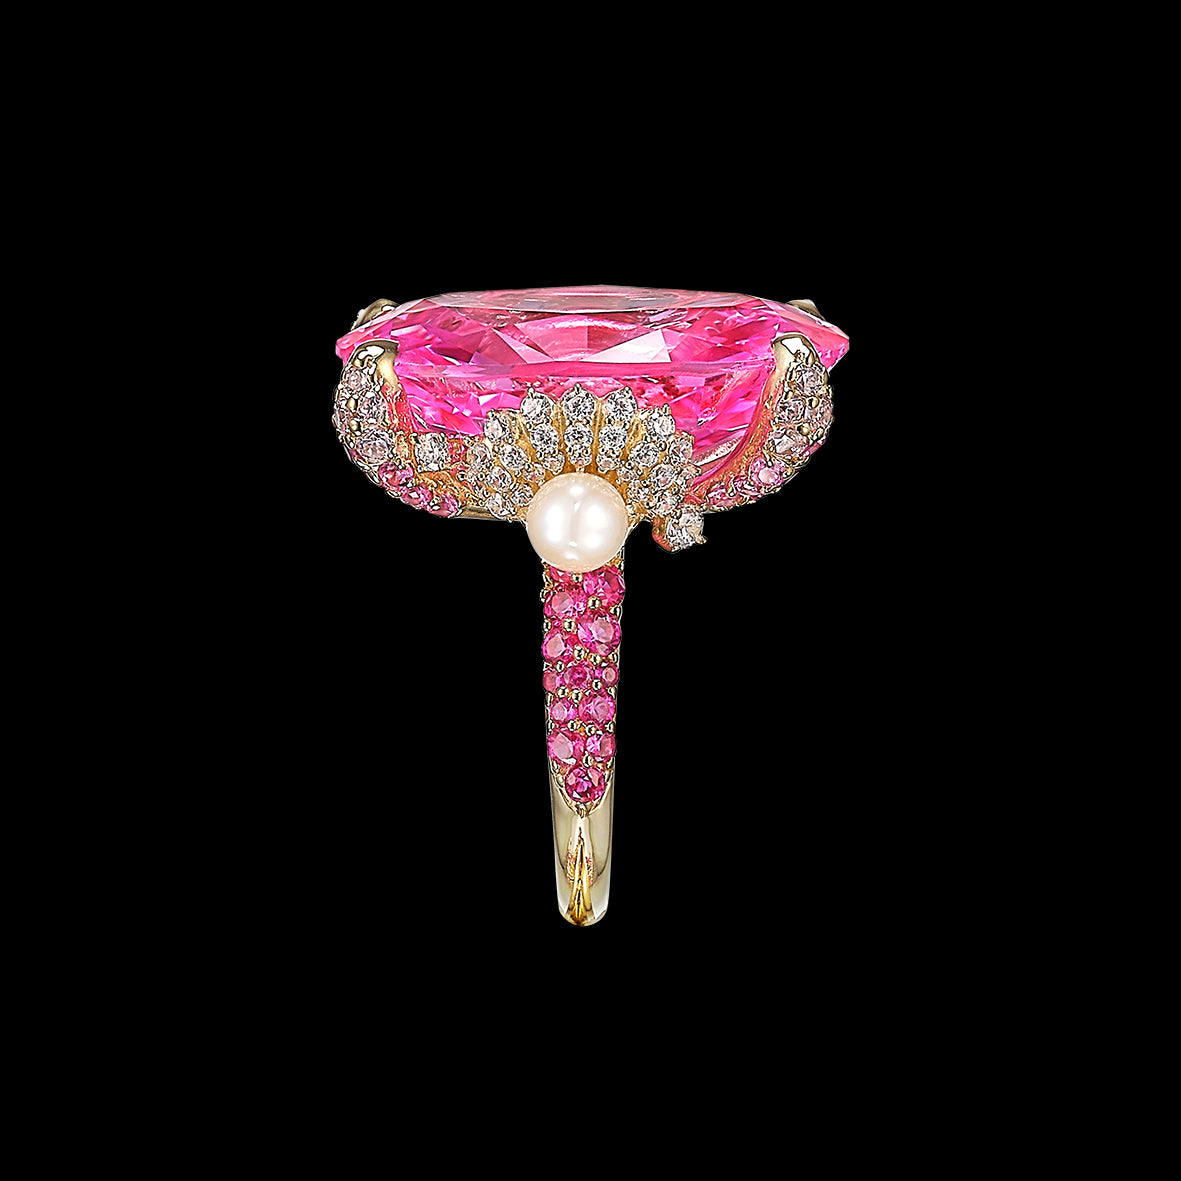 Rose Mermaid Ring, Ring, Anabela Chan Joaillerie - Fine jewelry with laboratory grown and created gemstones hand-crafted in the United Kingdom. Anabela Chan Joaillerie is the first fine jewellery brand in the world to champion laboratory-grown and created gemstones with high jewellery design, artisanal craftsmanship and a focus on ethical and sustainable innovations.